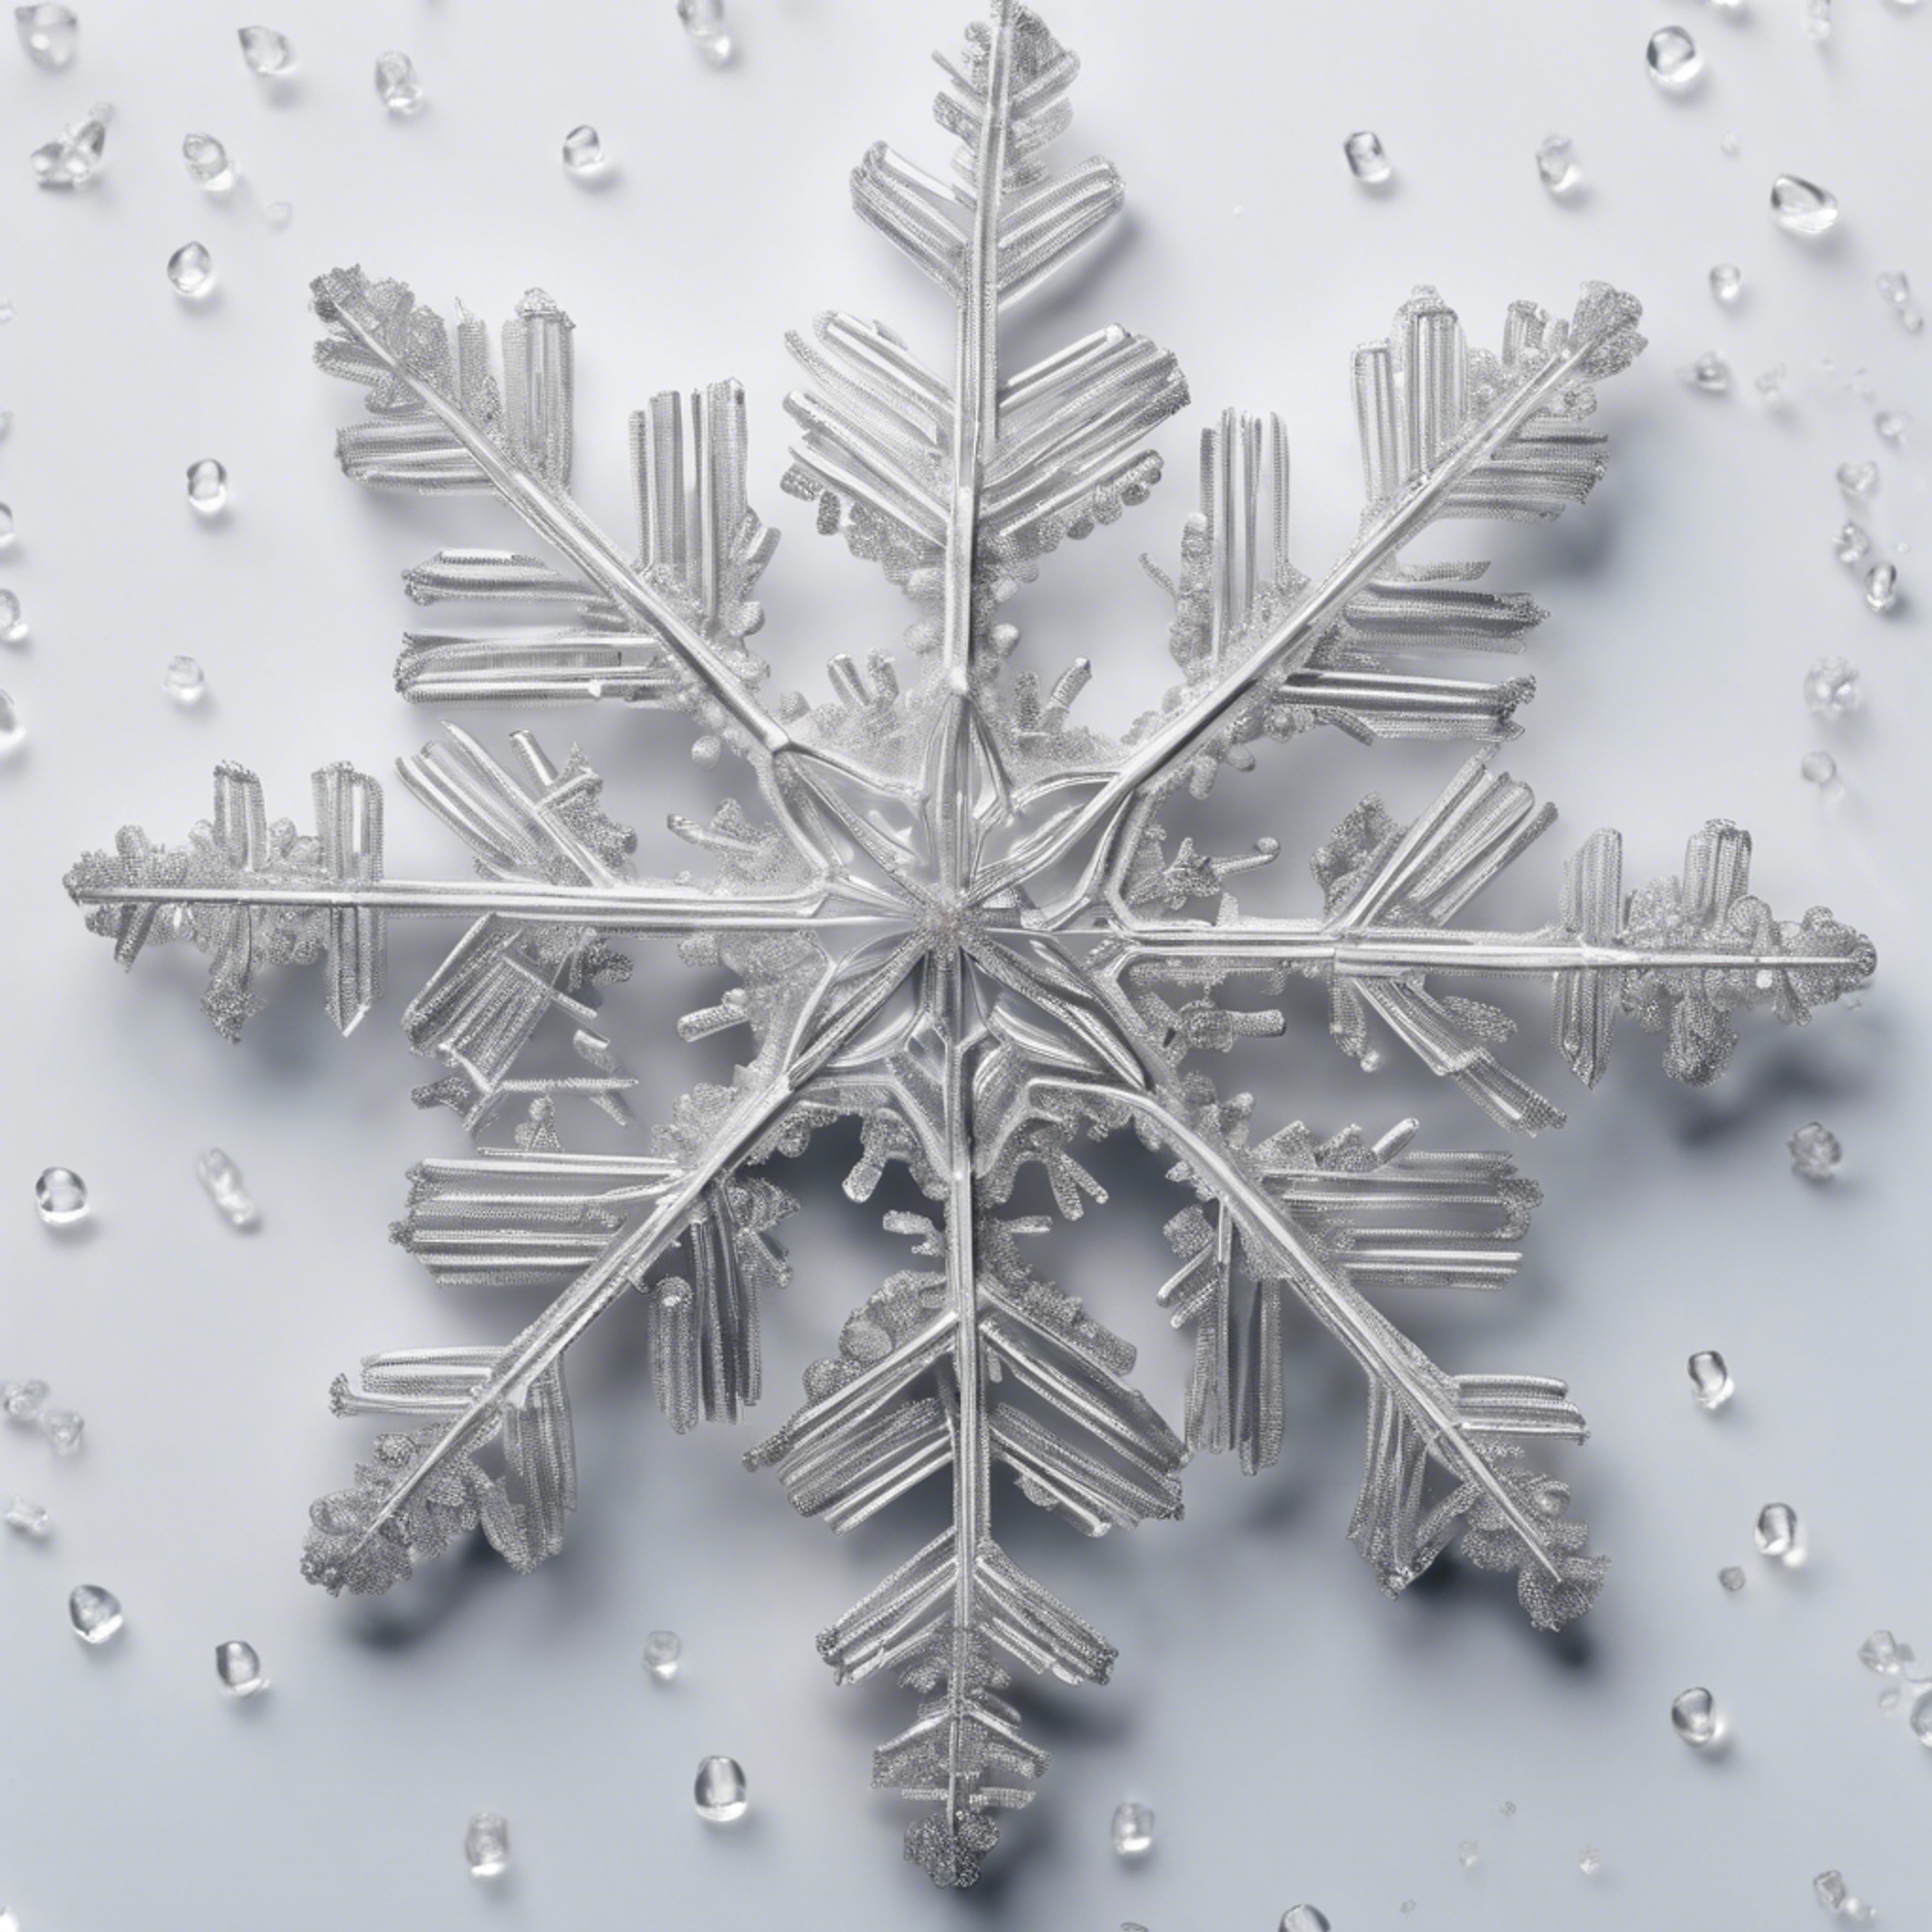 Close-up macro photography of a silver-white snowflake, intricate in detail, against a cool white background. Tapetai[e4635791b5a244959ce4]